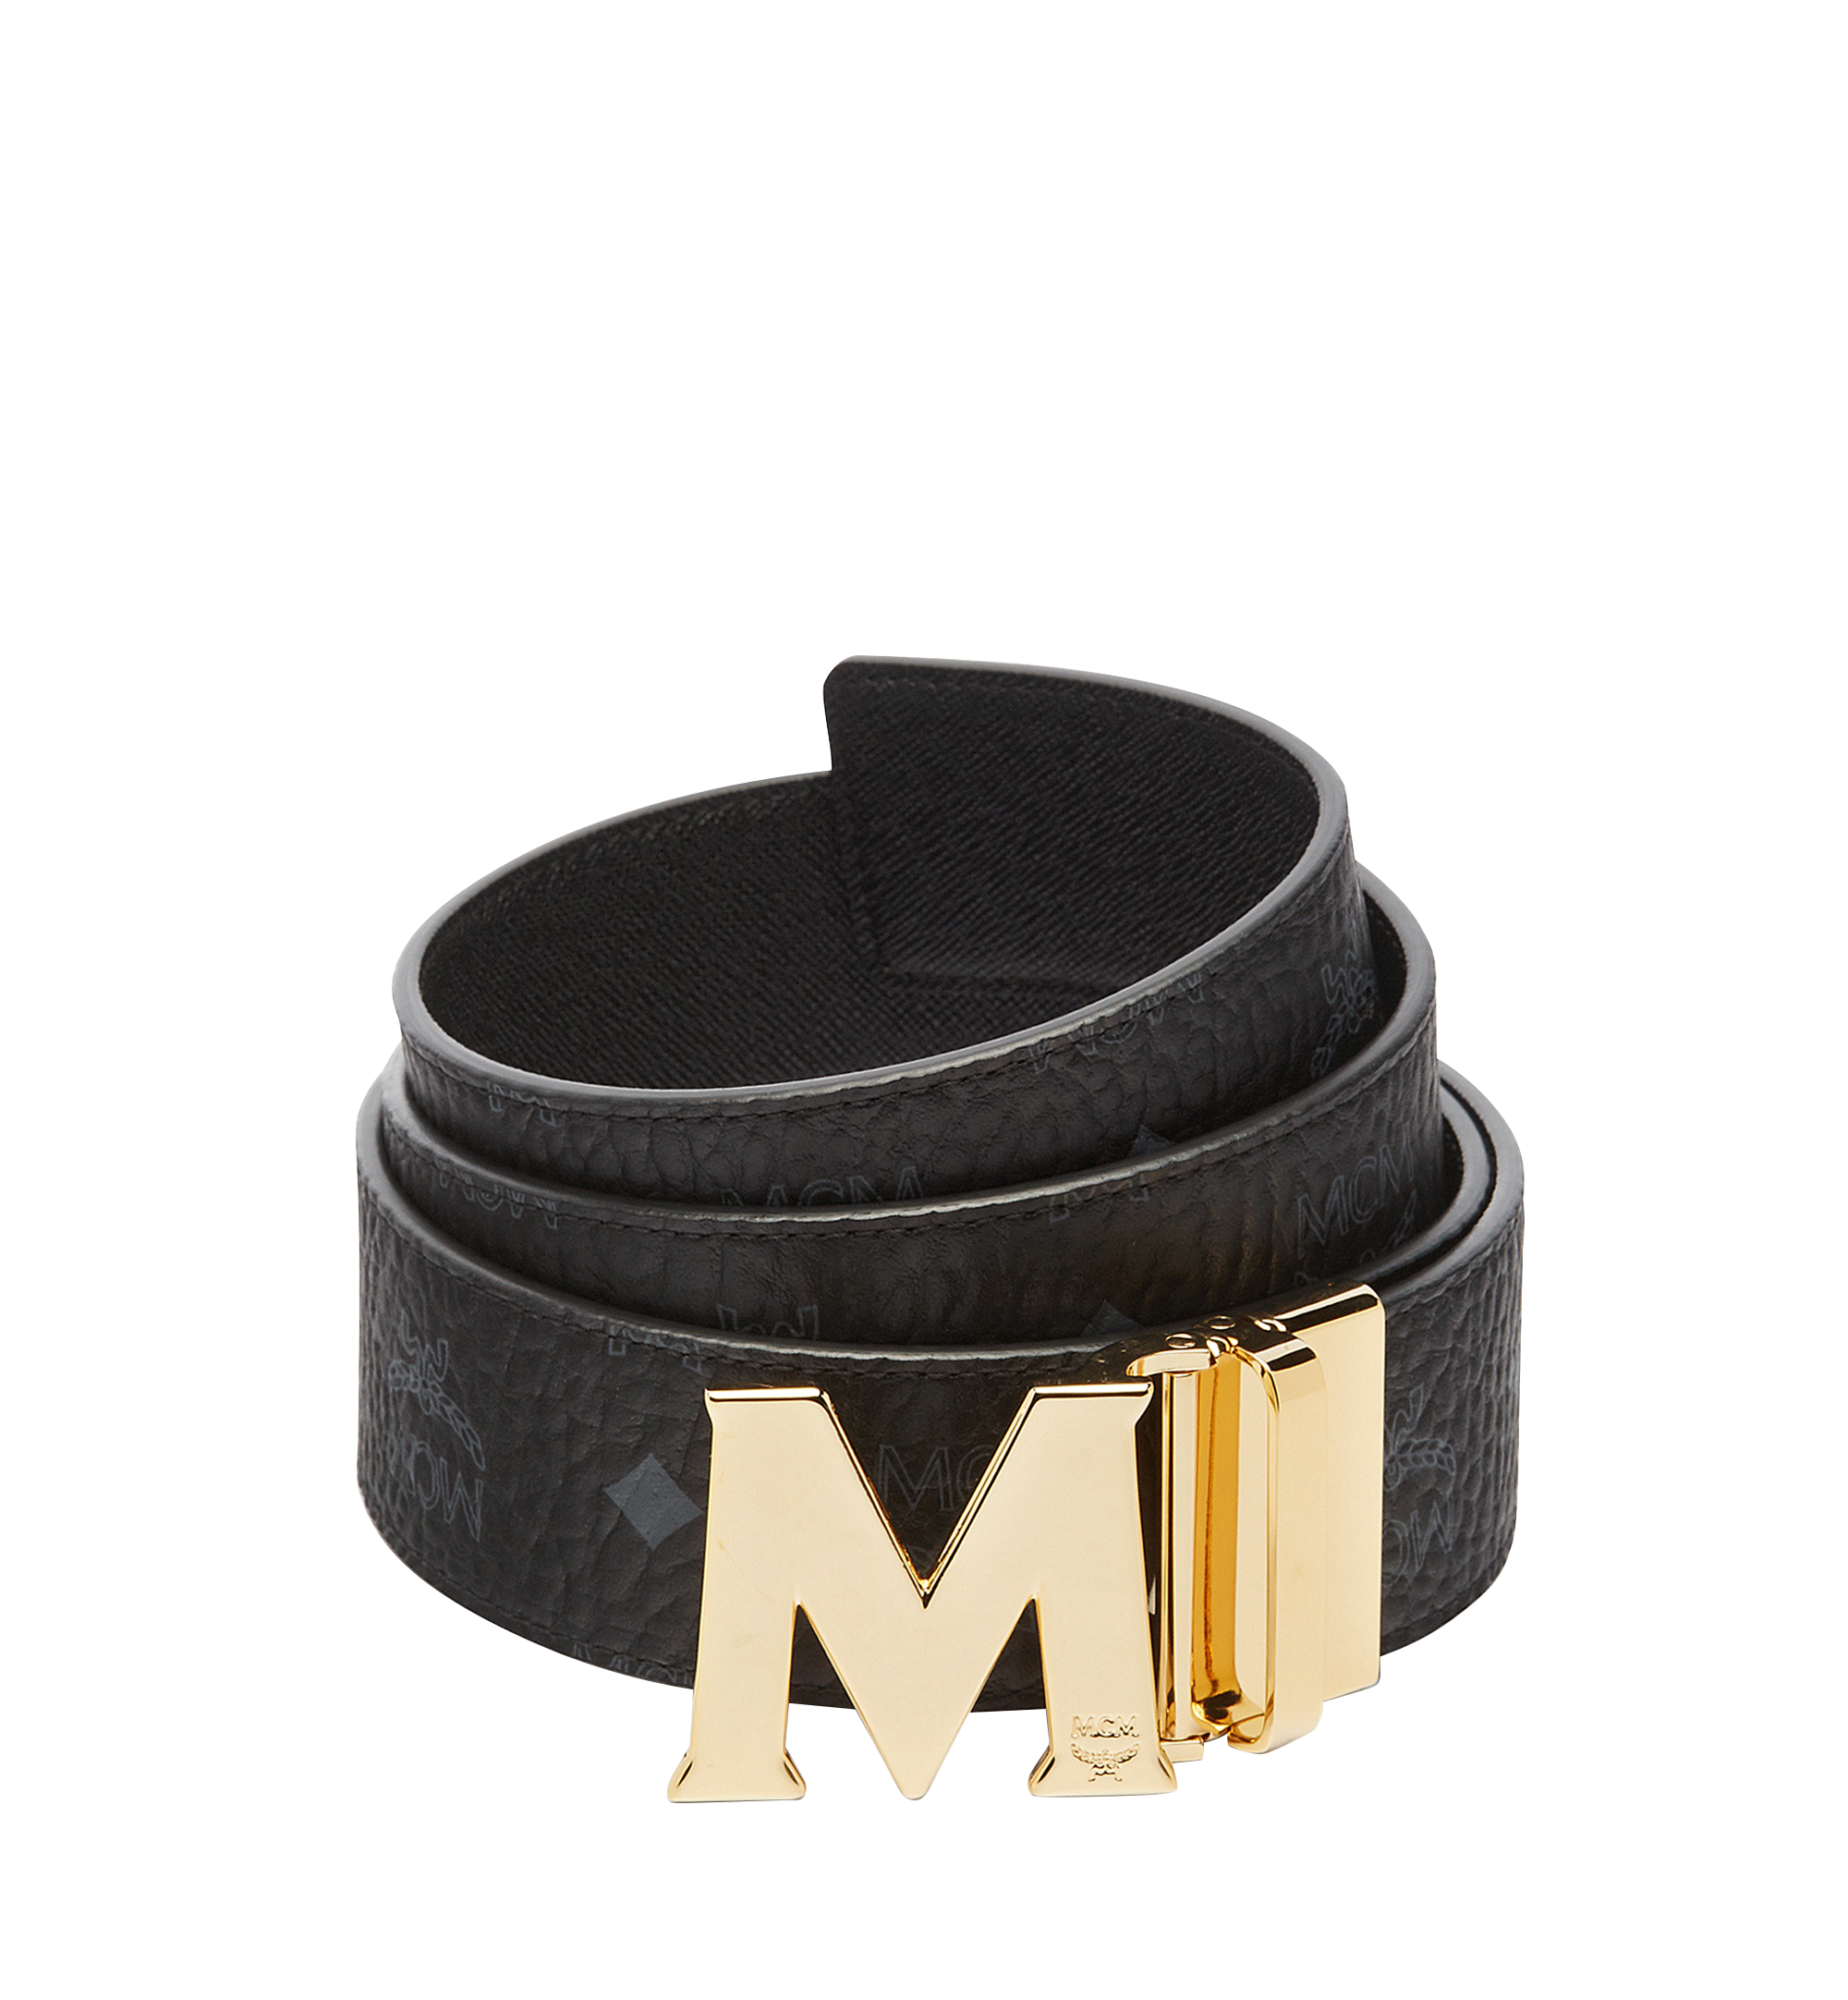 A Complete Guide How to tell a real vs fake MCM BELT 